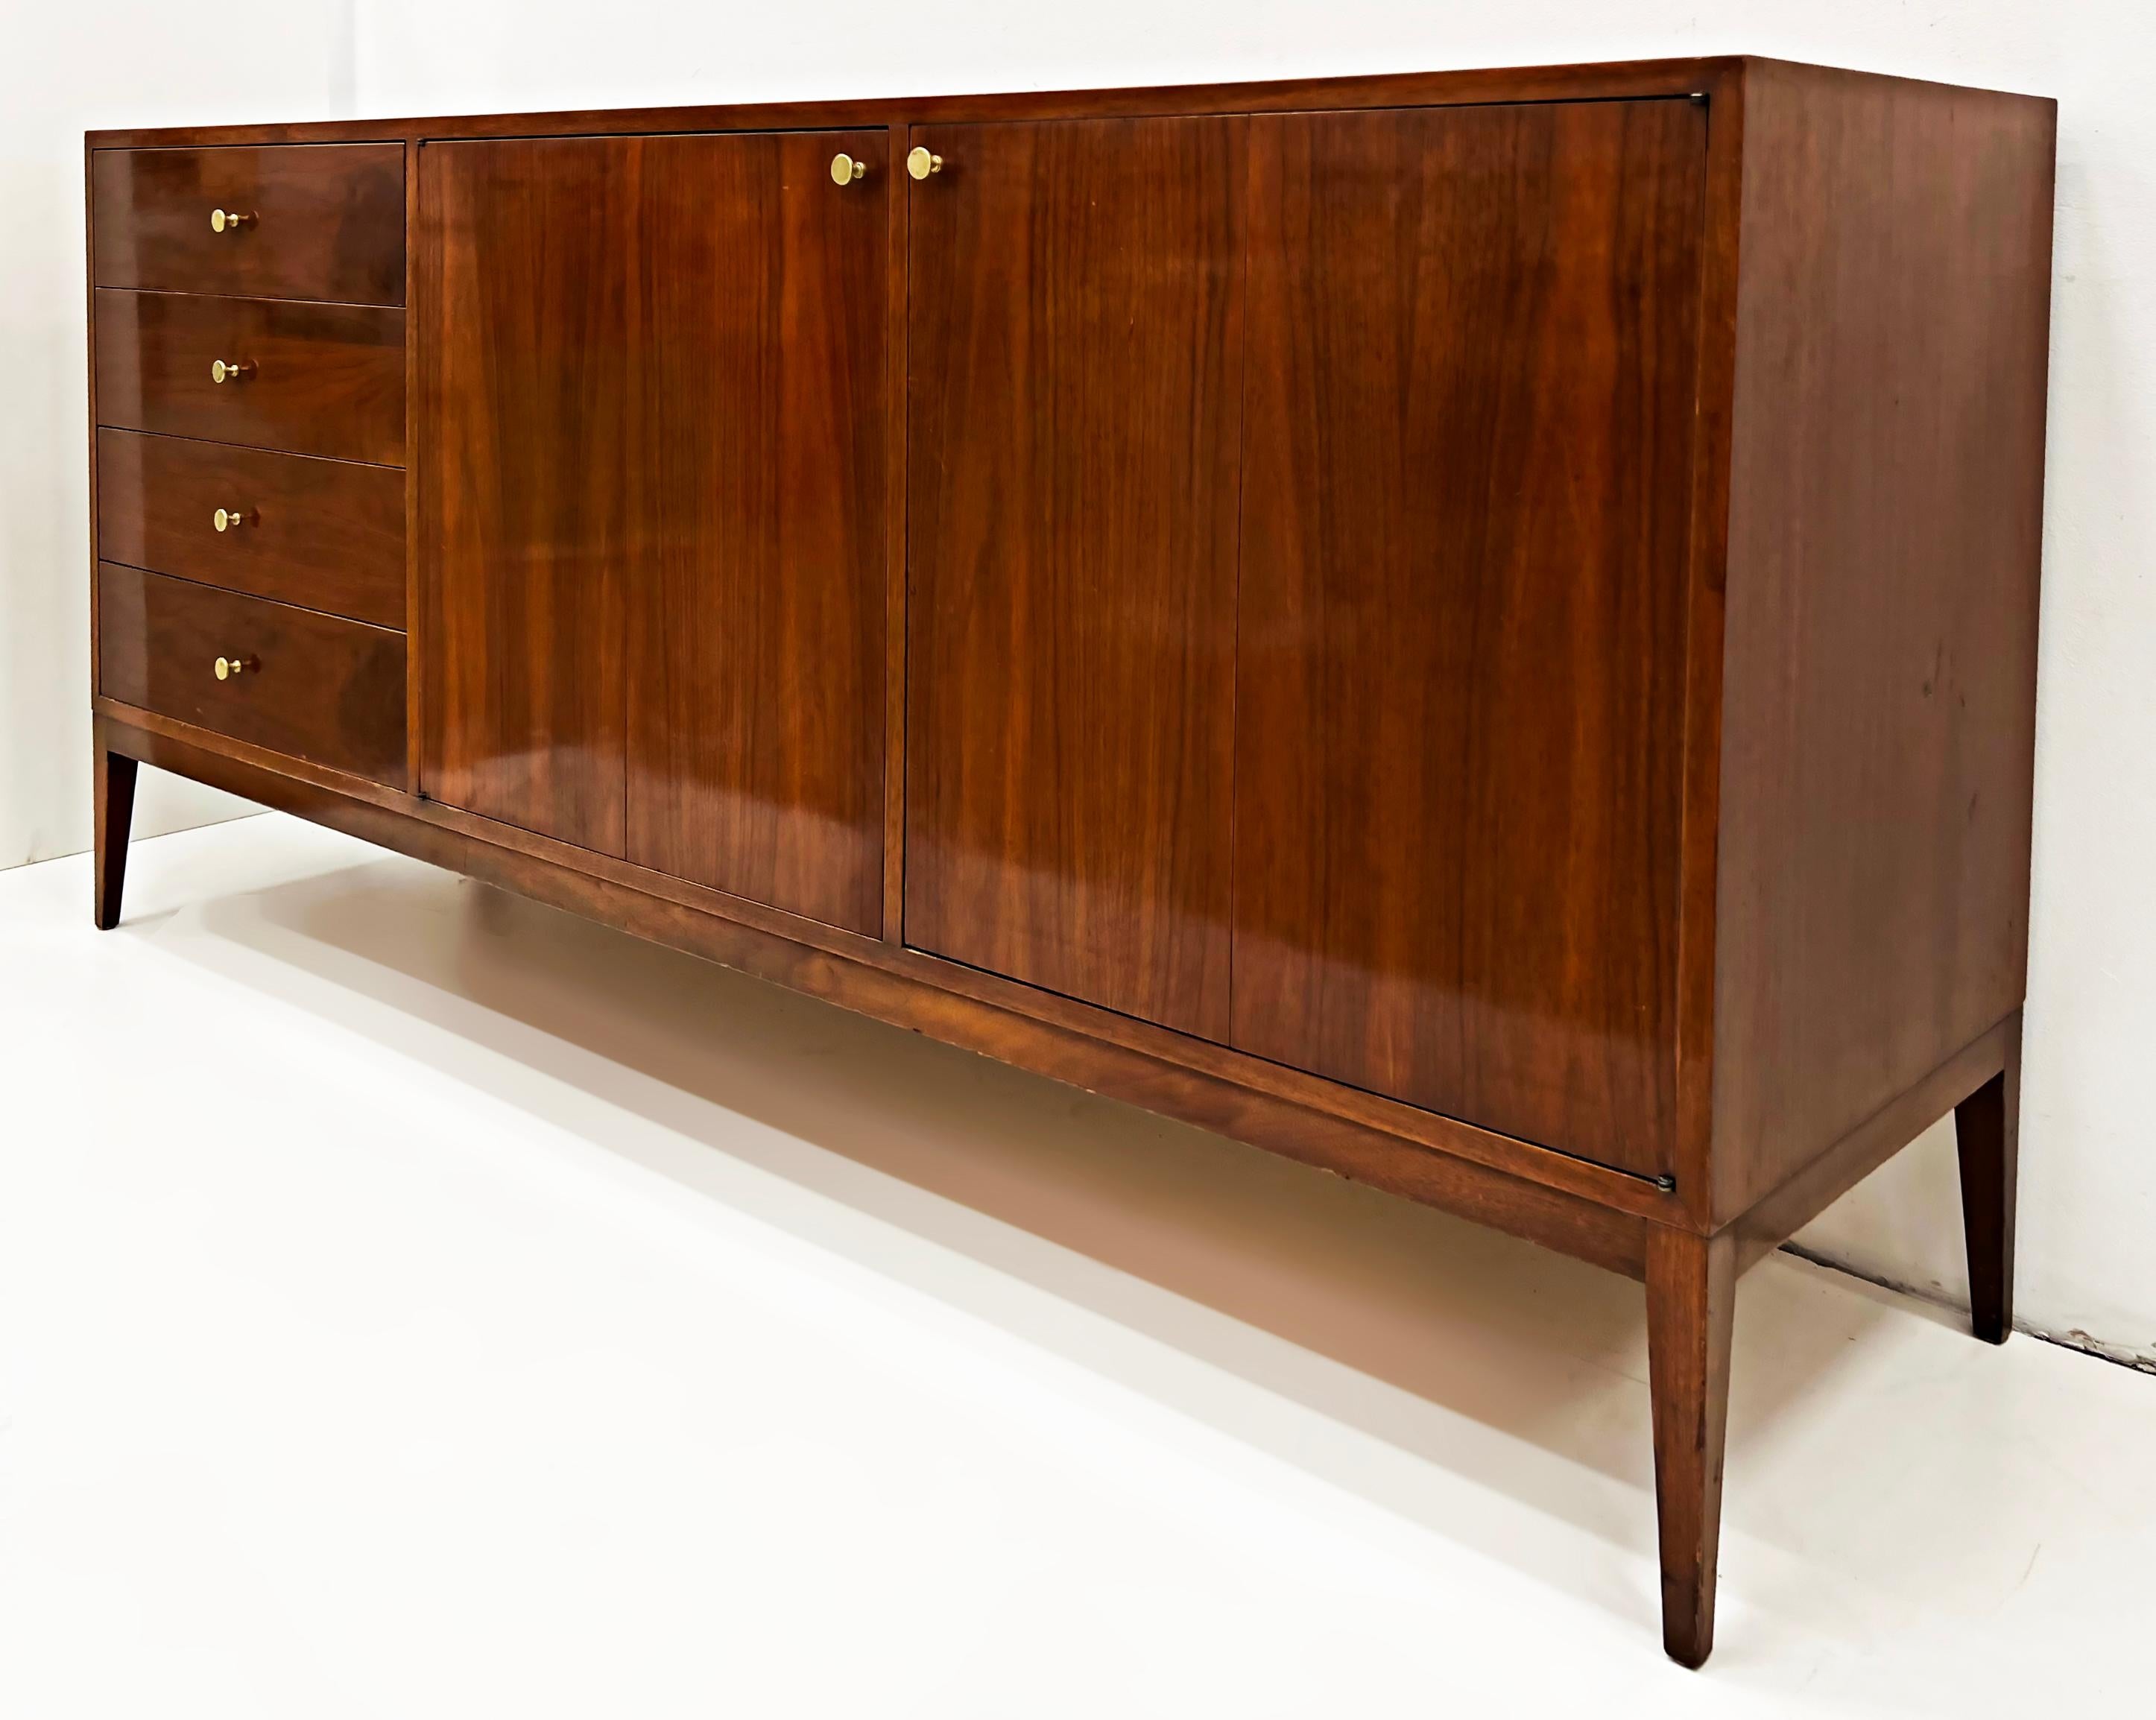 Paul McCobb Mid-Century Modern walnut 12 drawer dresser 

Offred for sale is a Mid-Century Modern Walnut 12 drawer dresser by Paul McCobb. This sleek dresser has four drawers to the left and two doors to the right which open to reveal eight